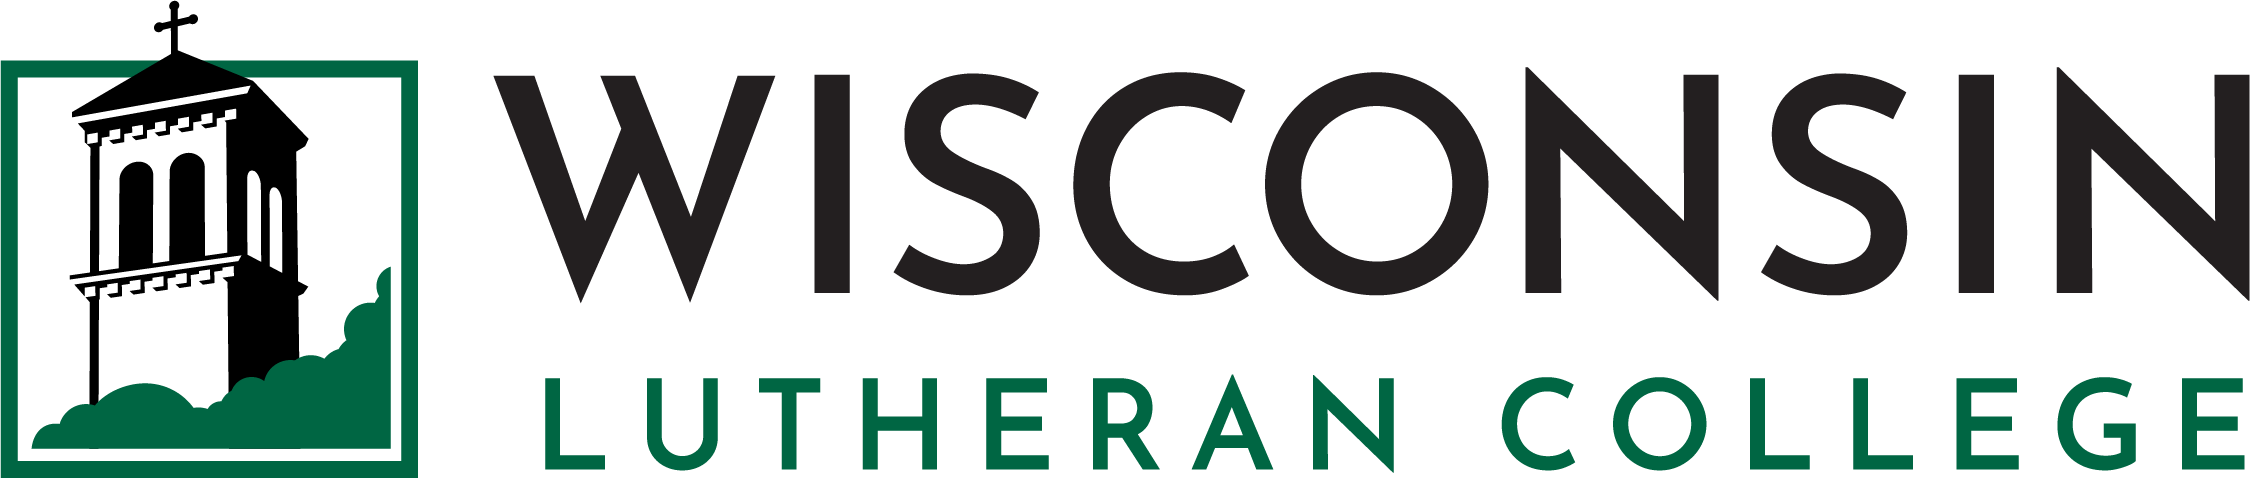 Wisconsin Lutheran College Logo.png